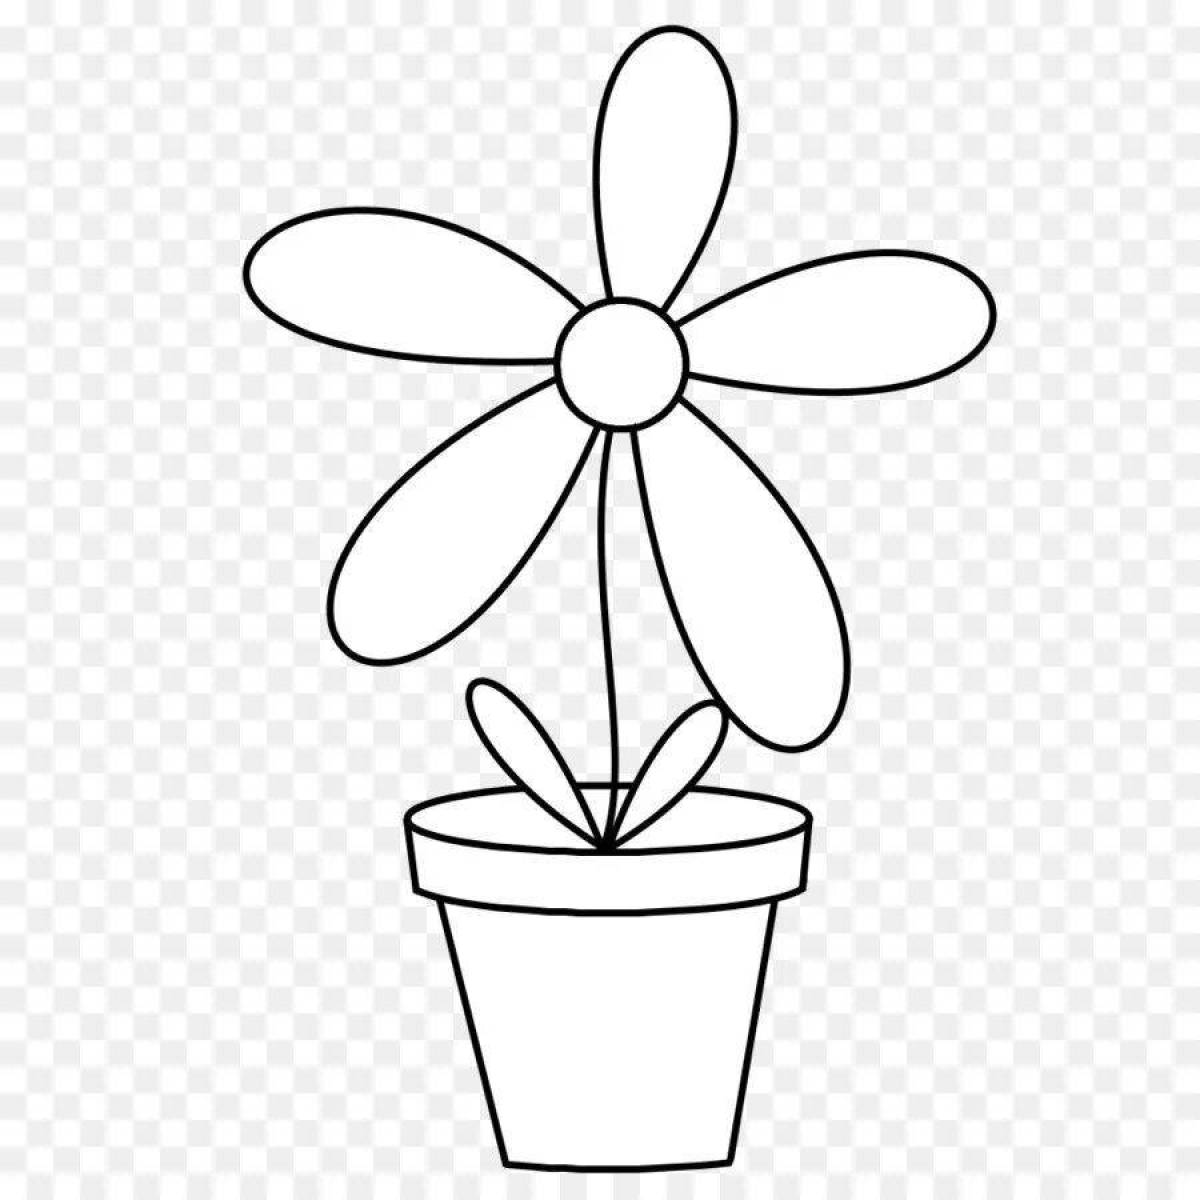 Potted flower #2